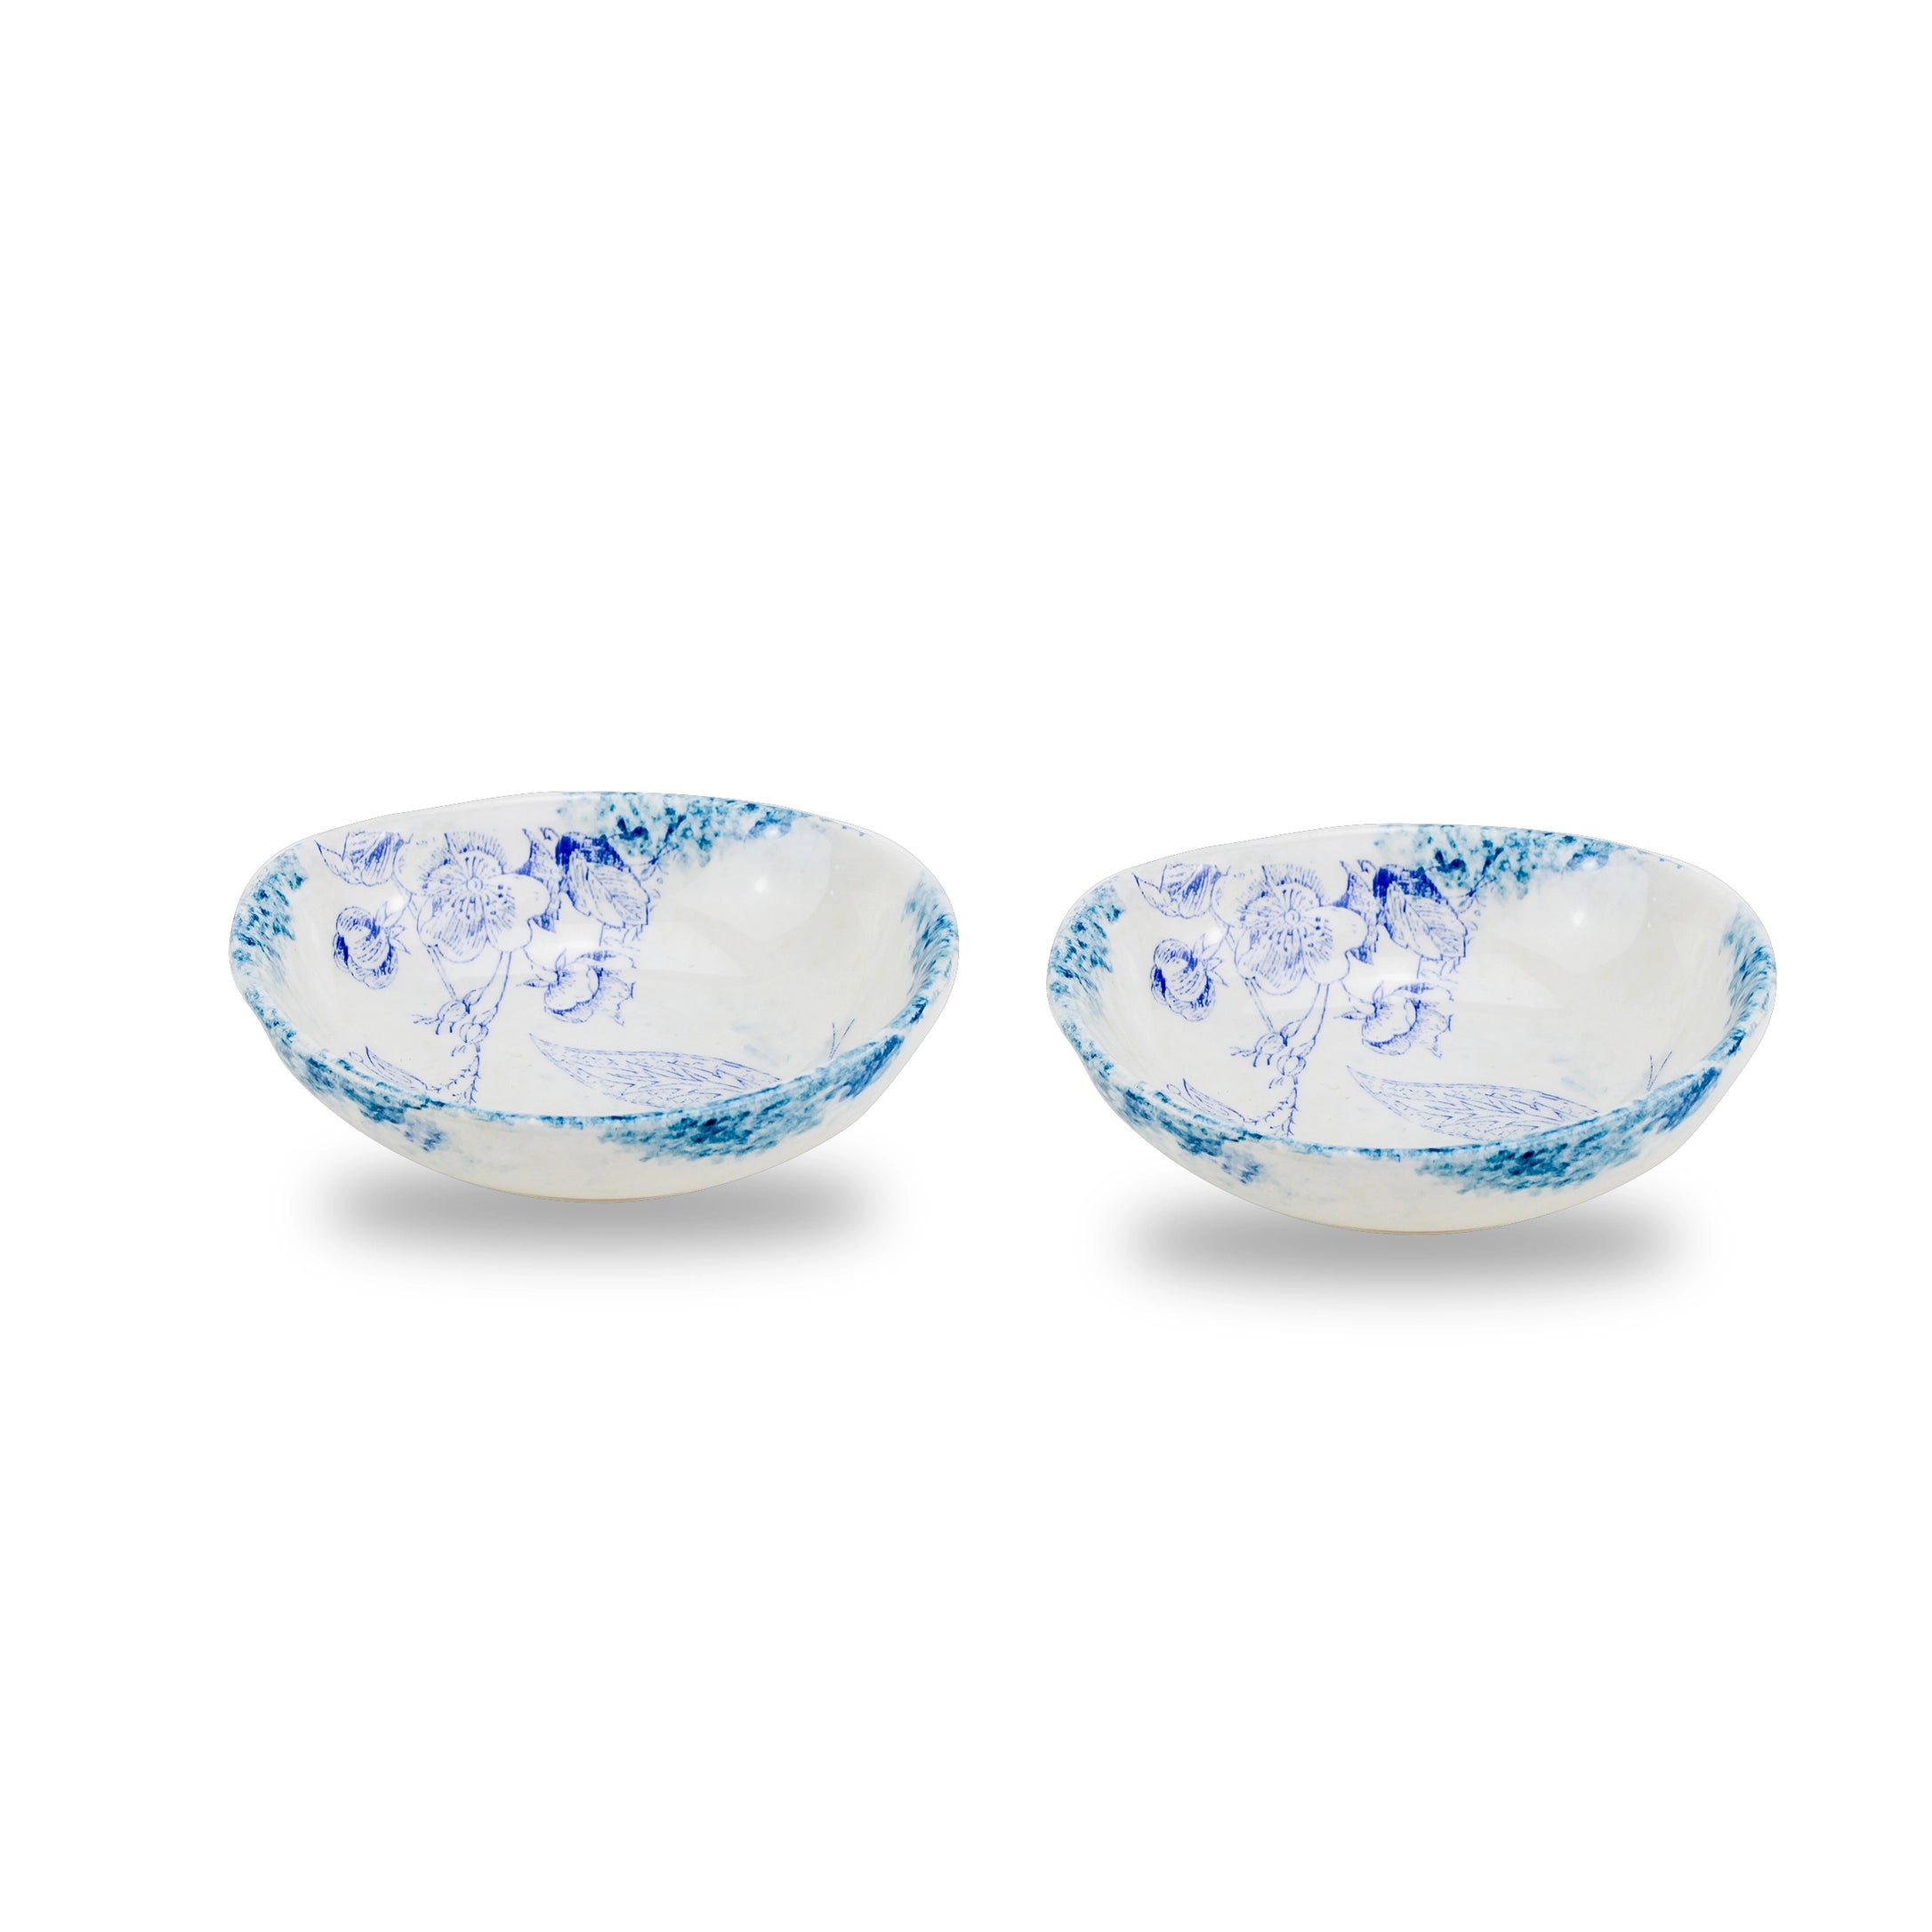 Giulietta Blue Oval Dipping Bowl - Set of 2